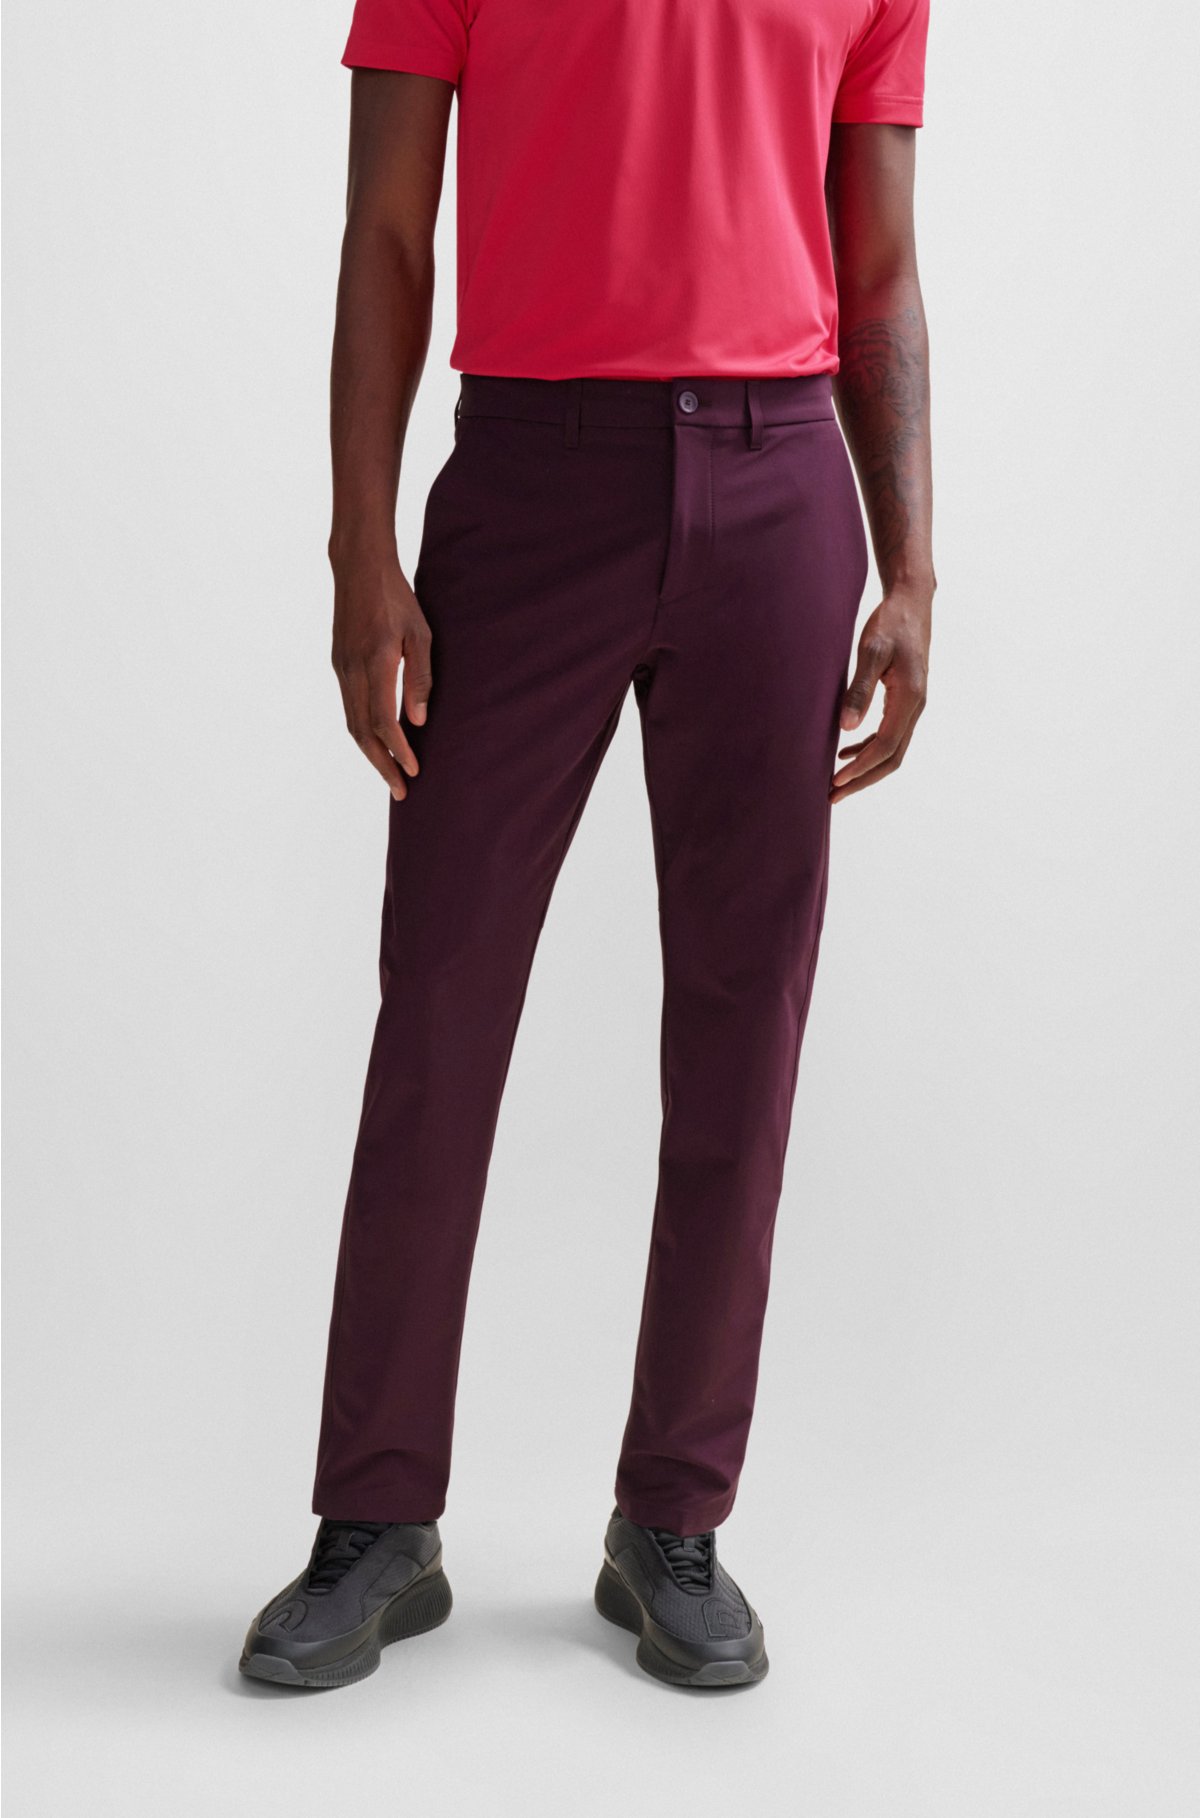 BOSS - Slim-fit chinos in easy-iron four-way stretch fabric